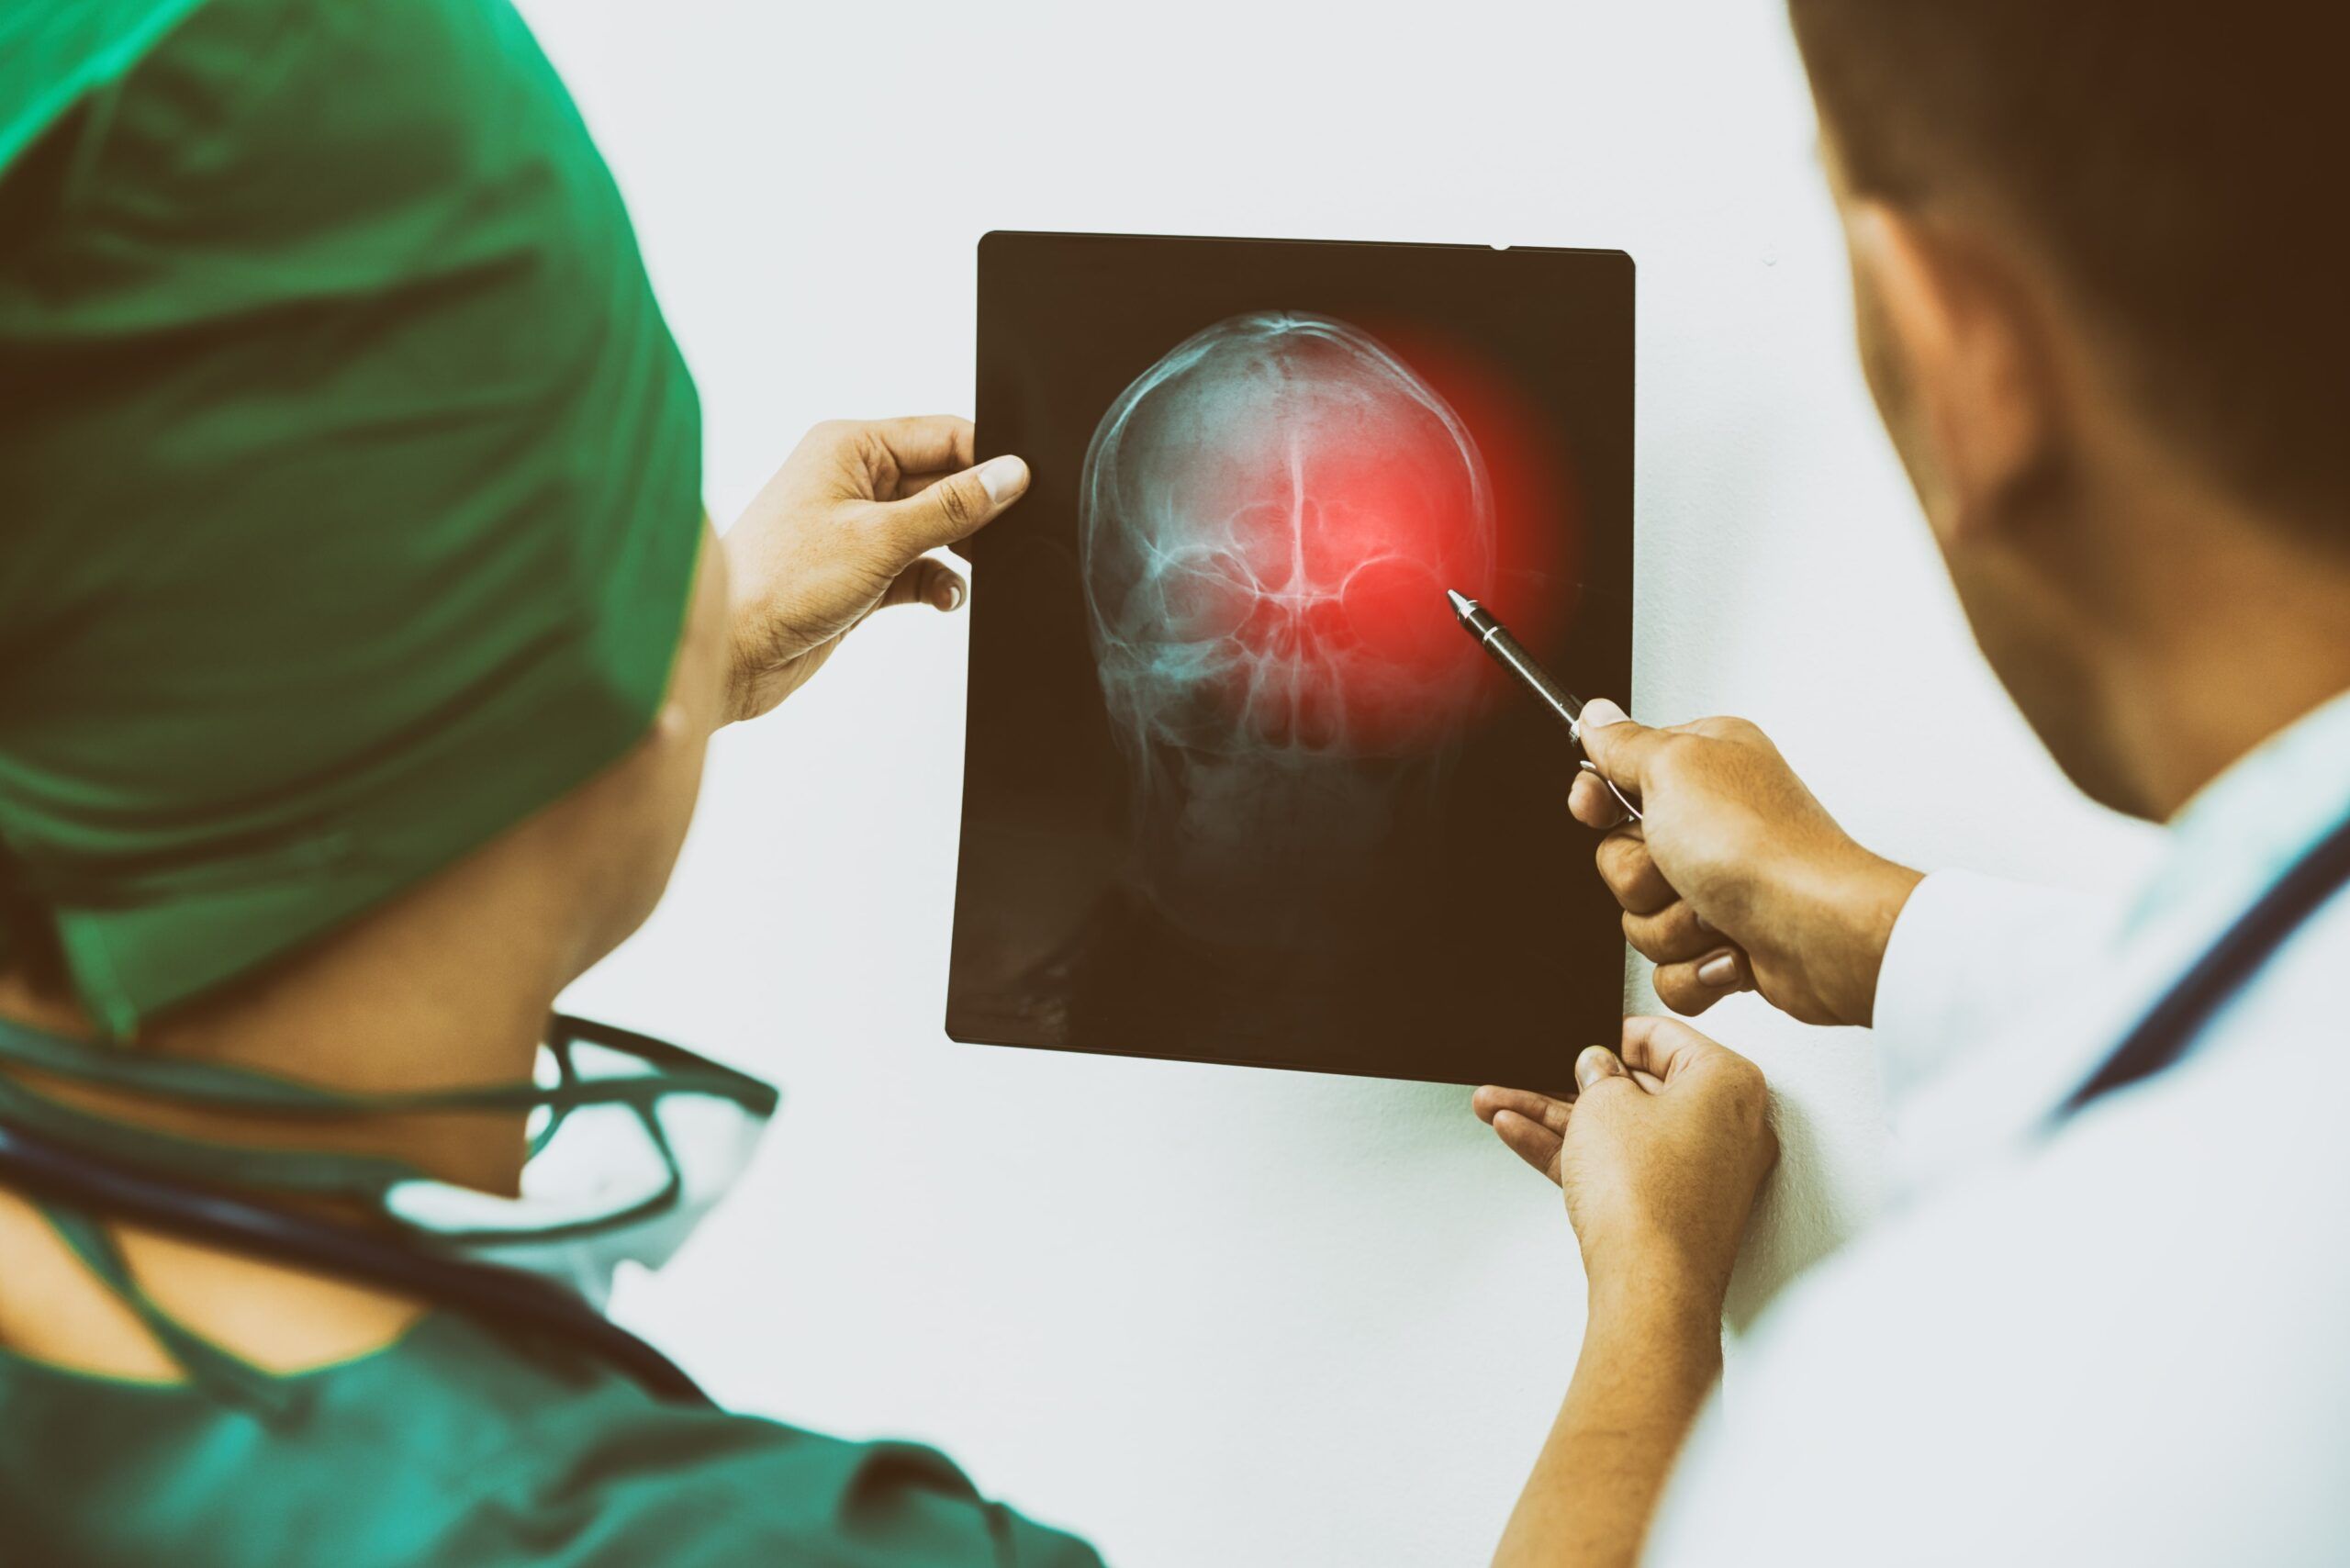 Doctor and surgeon examining x-ray film of patient 's head for brain, skull or eye injury. Medical diagnosis and surgical treatment concept.